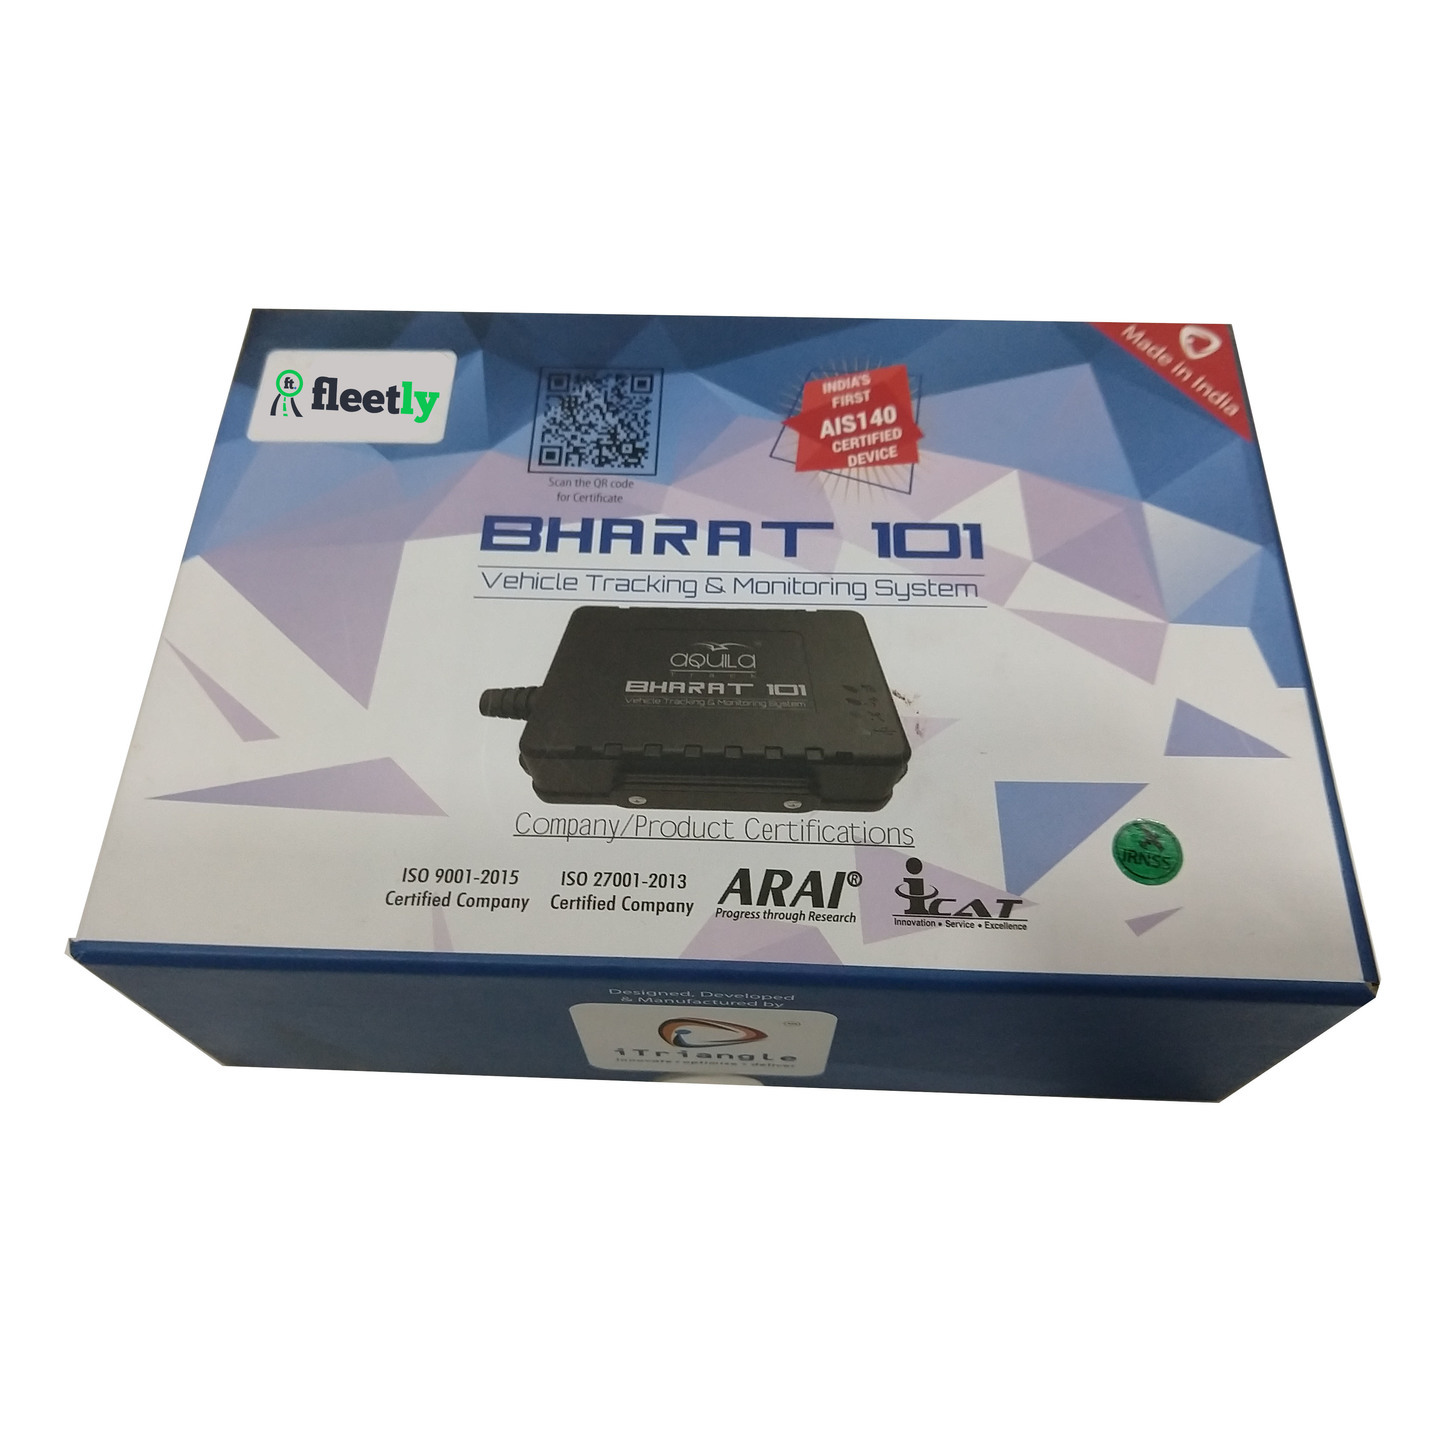 AIS-140 Vehicle Tracking with Bharat 101 and Fleetly Tracking platform